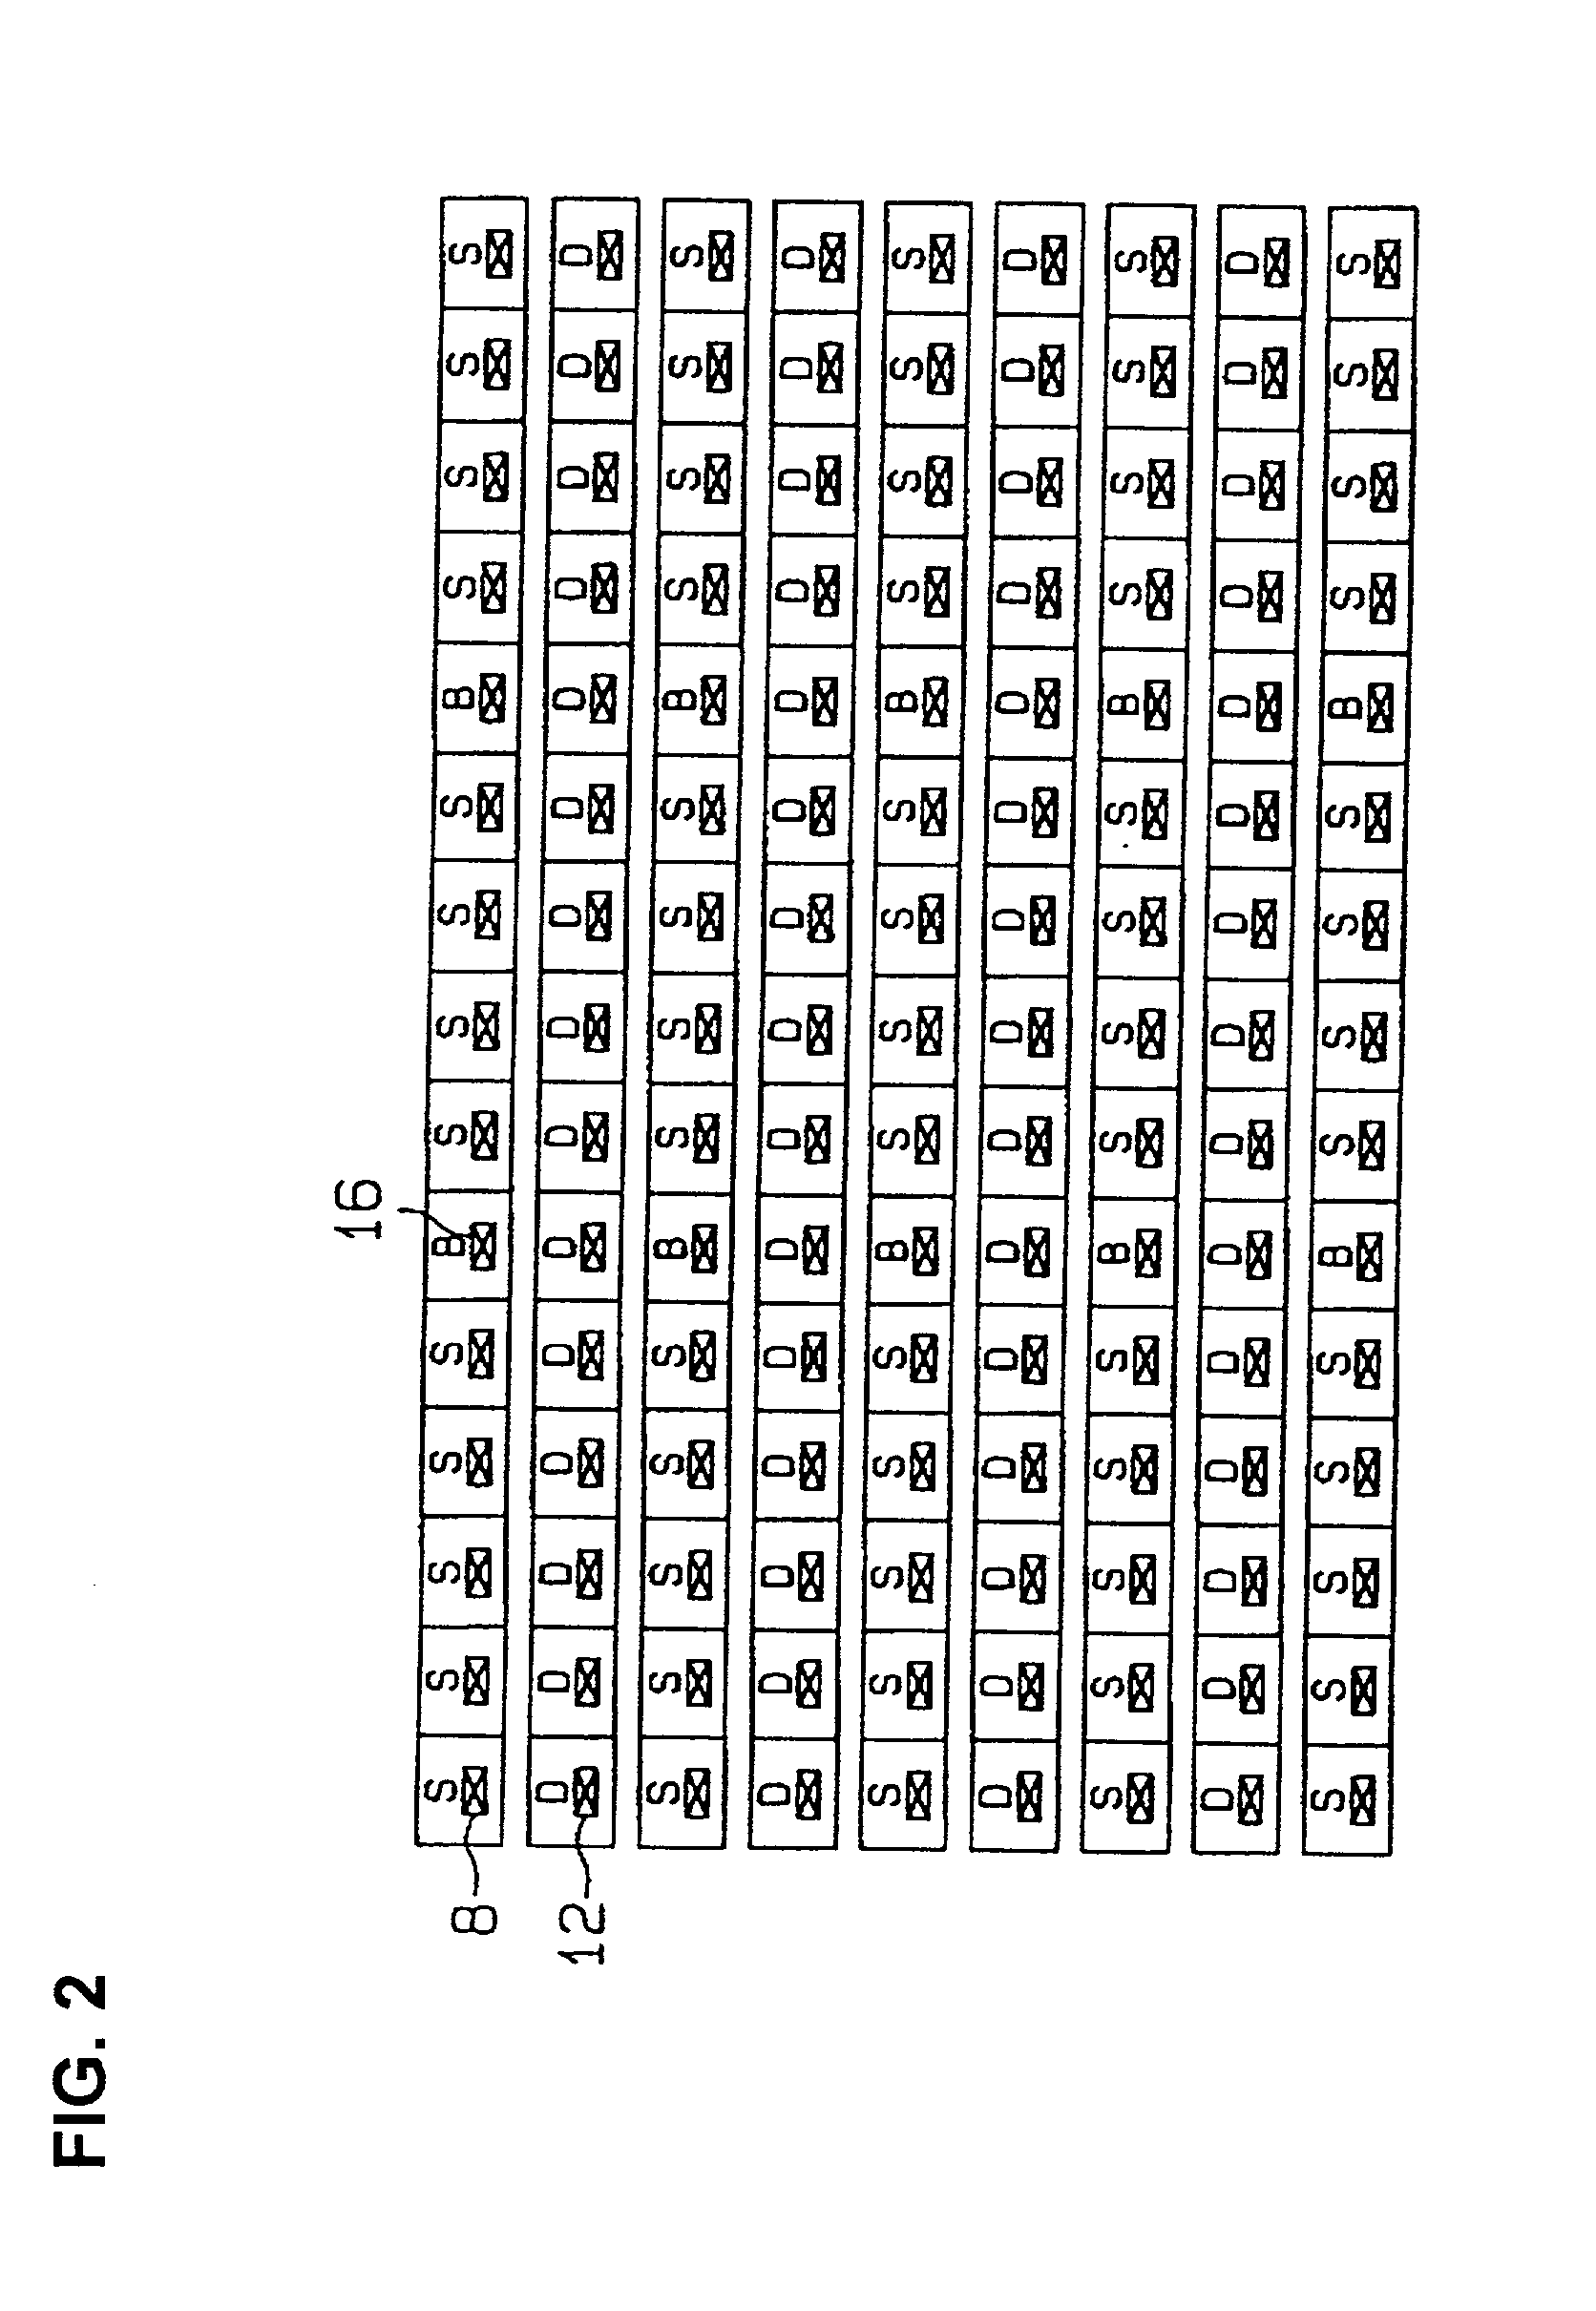 Power MOS transistor having capability for setting substrate potential independently of source potential